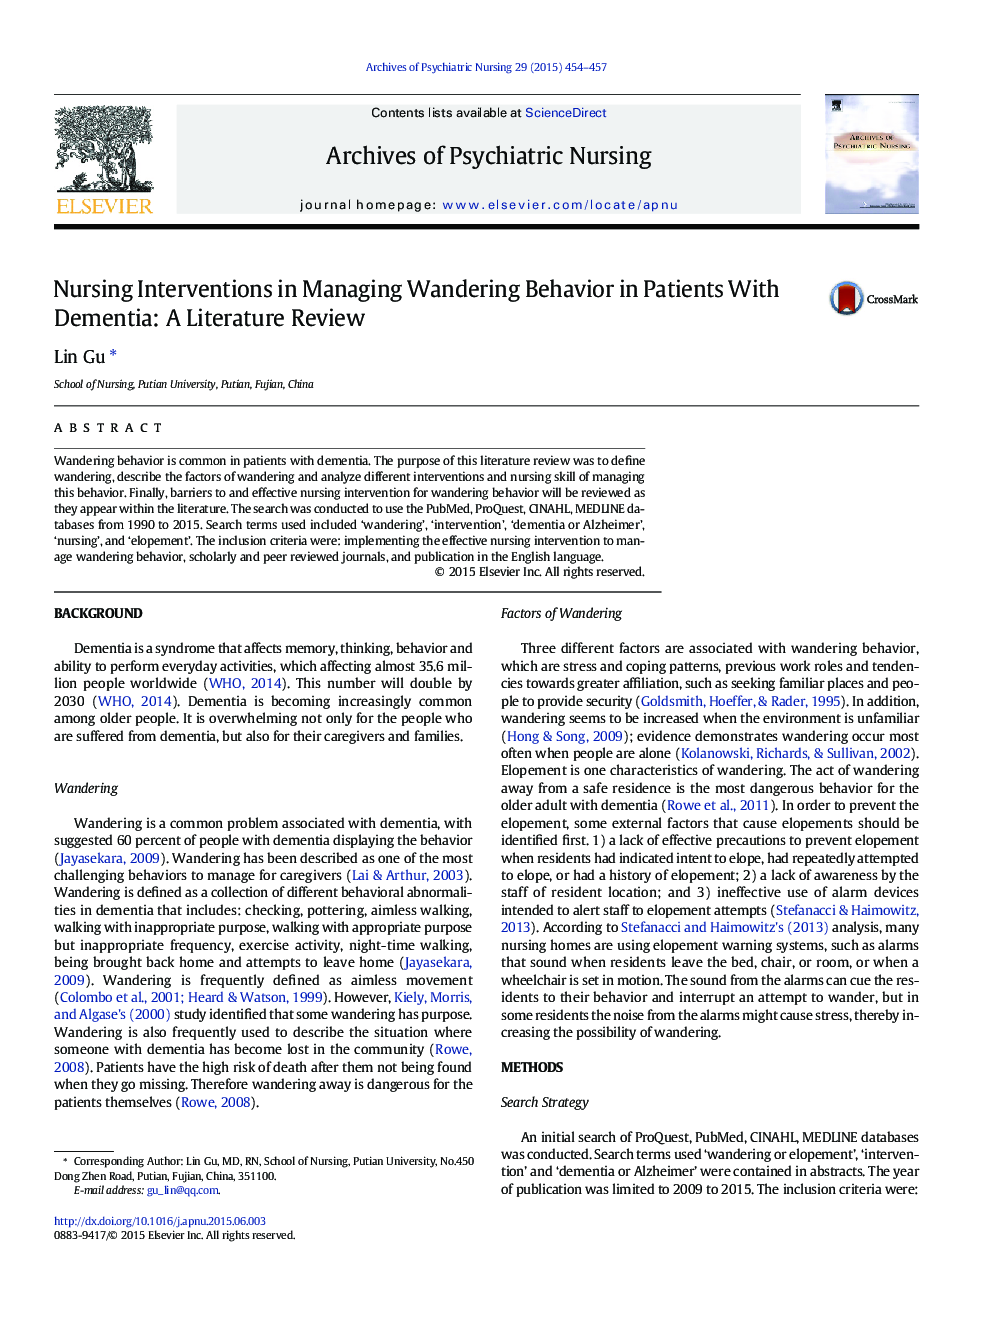 Nursing Interventions in Managing Wandering Behavior in Patients With Dementia: A Literature Review